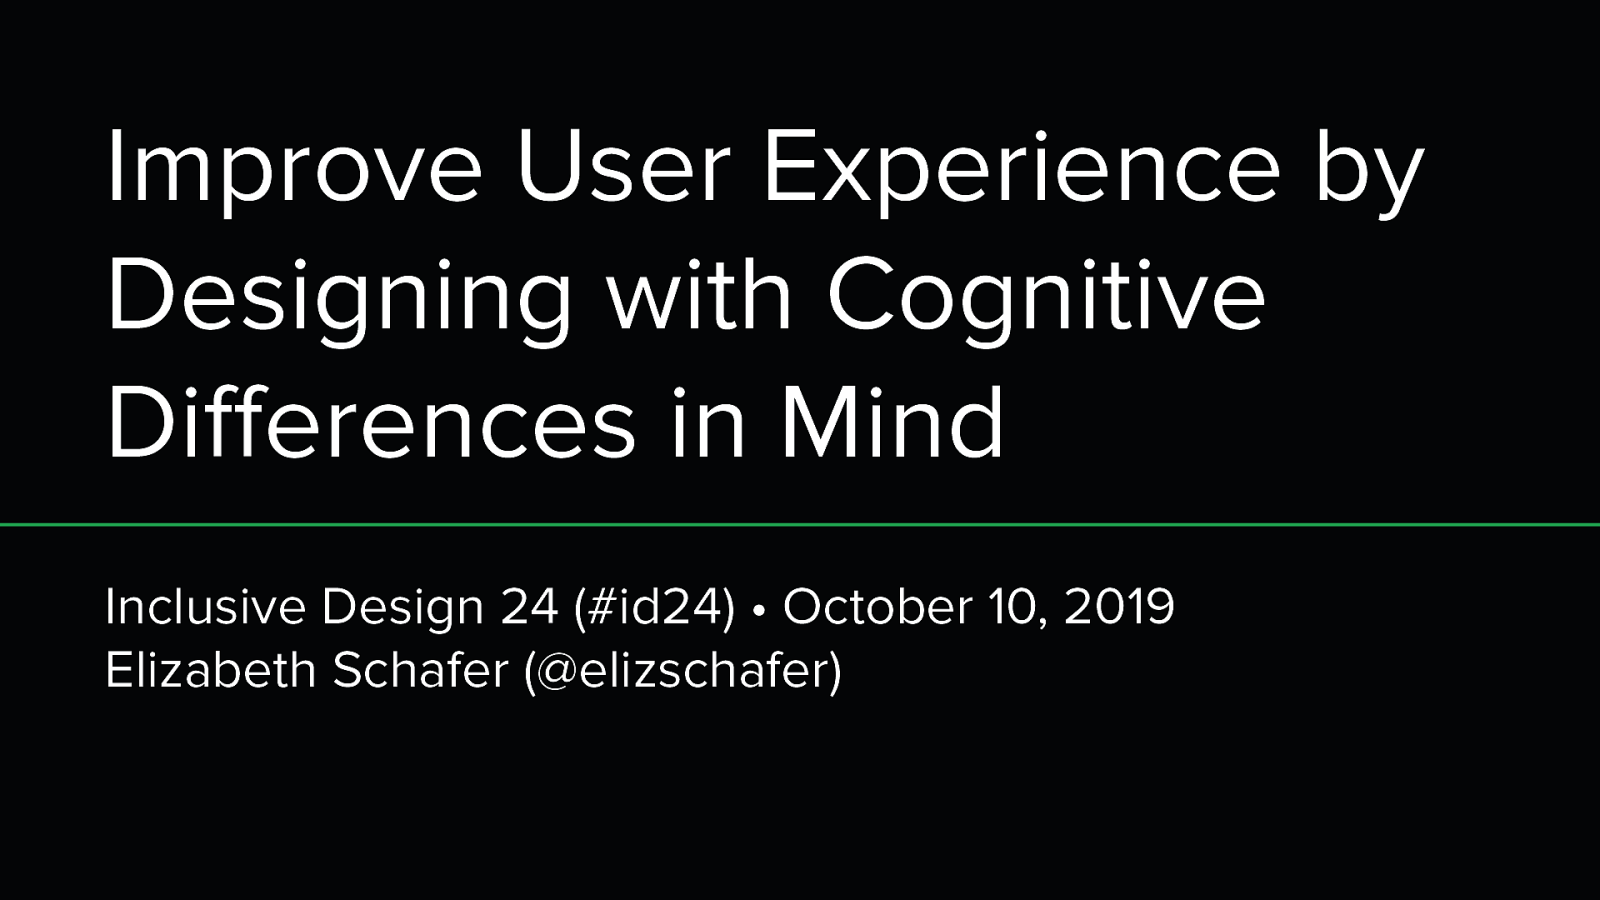 Improve User Experience by Designing with Cognitive Differences in Mind